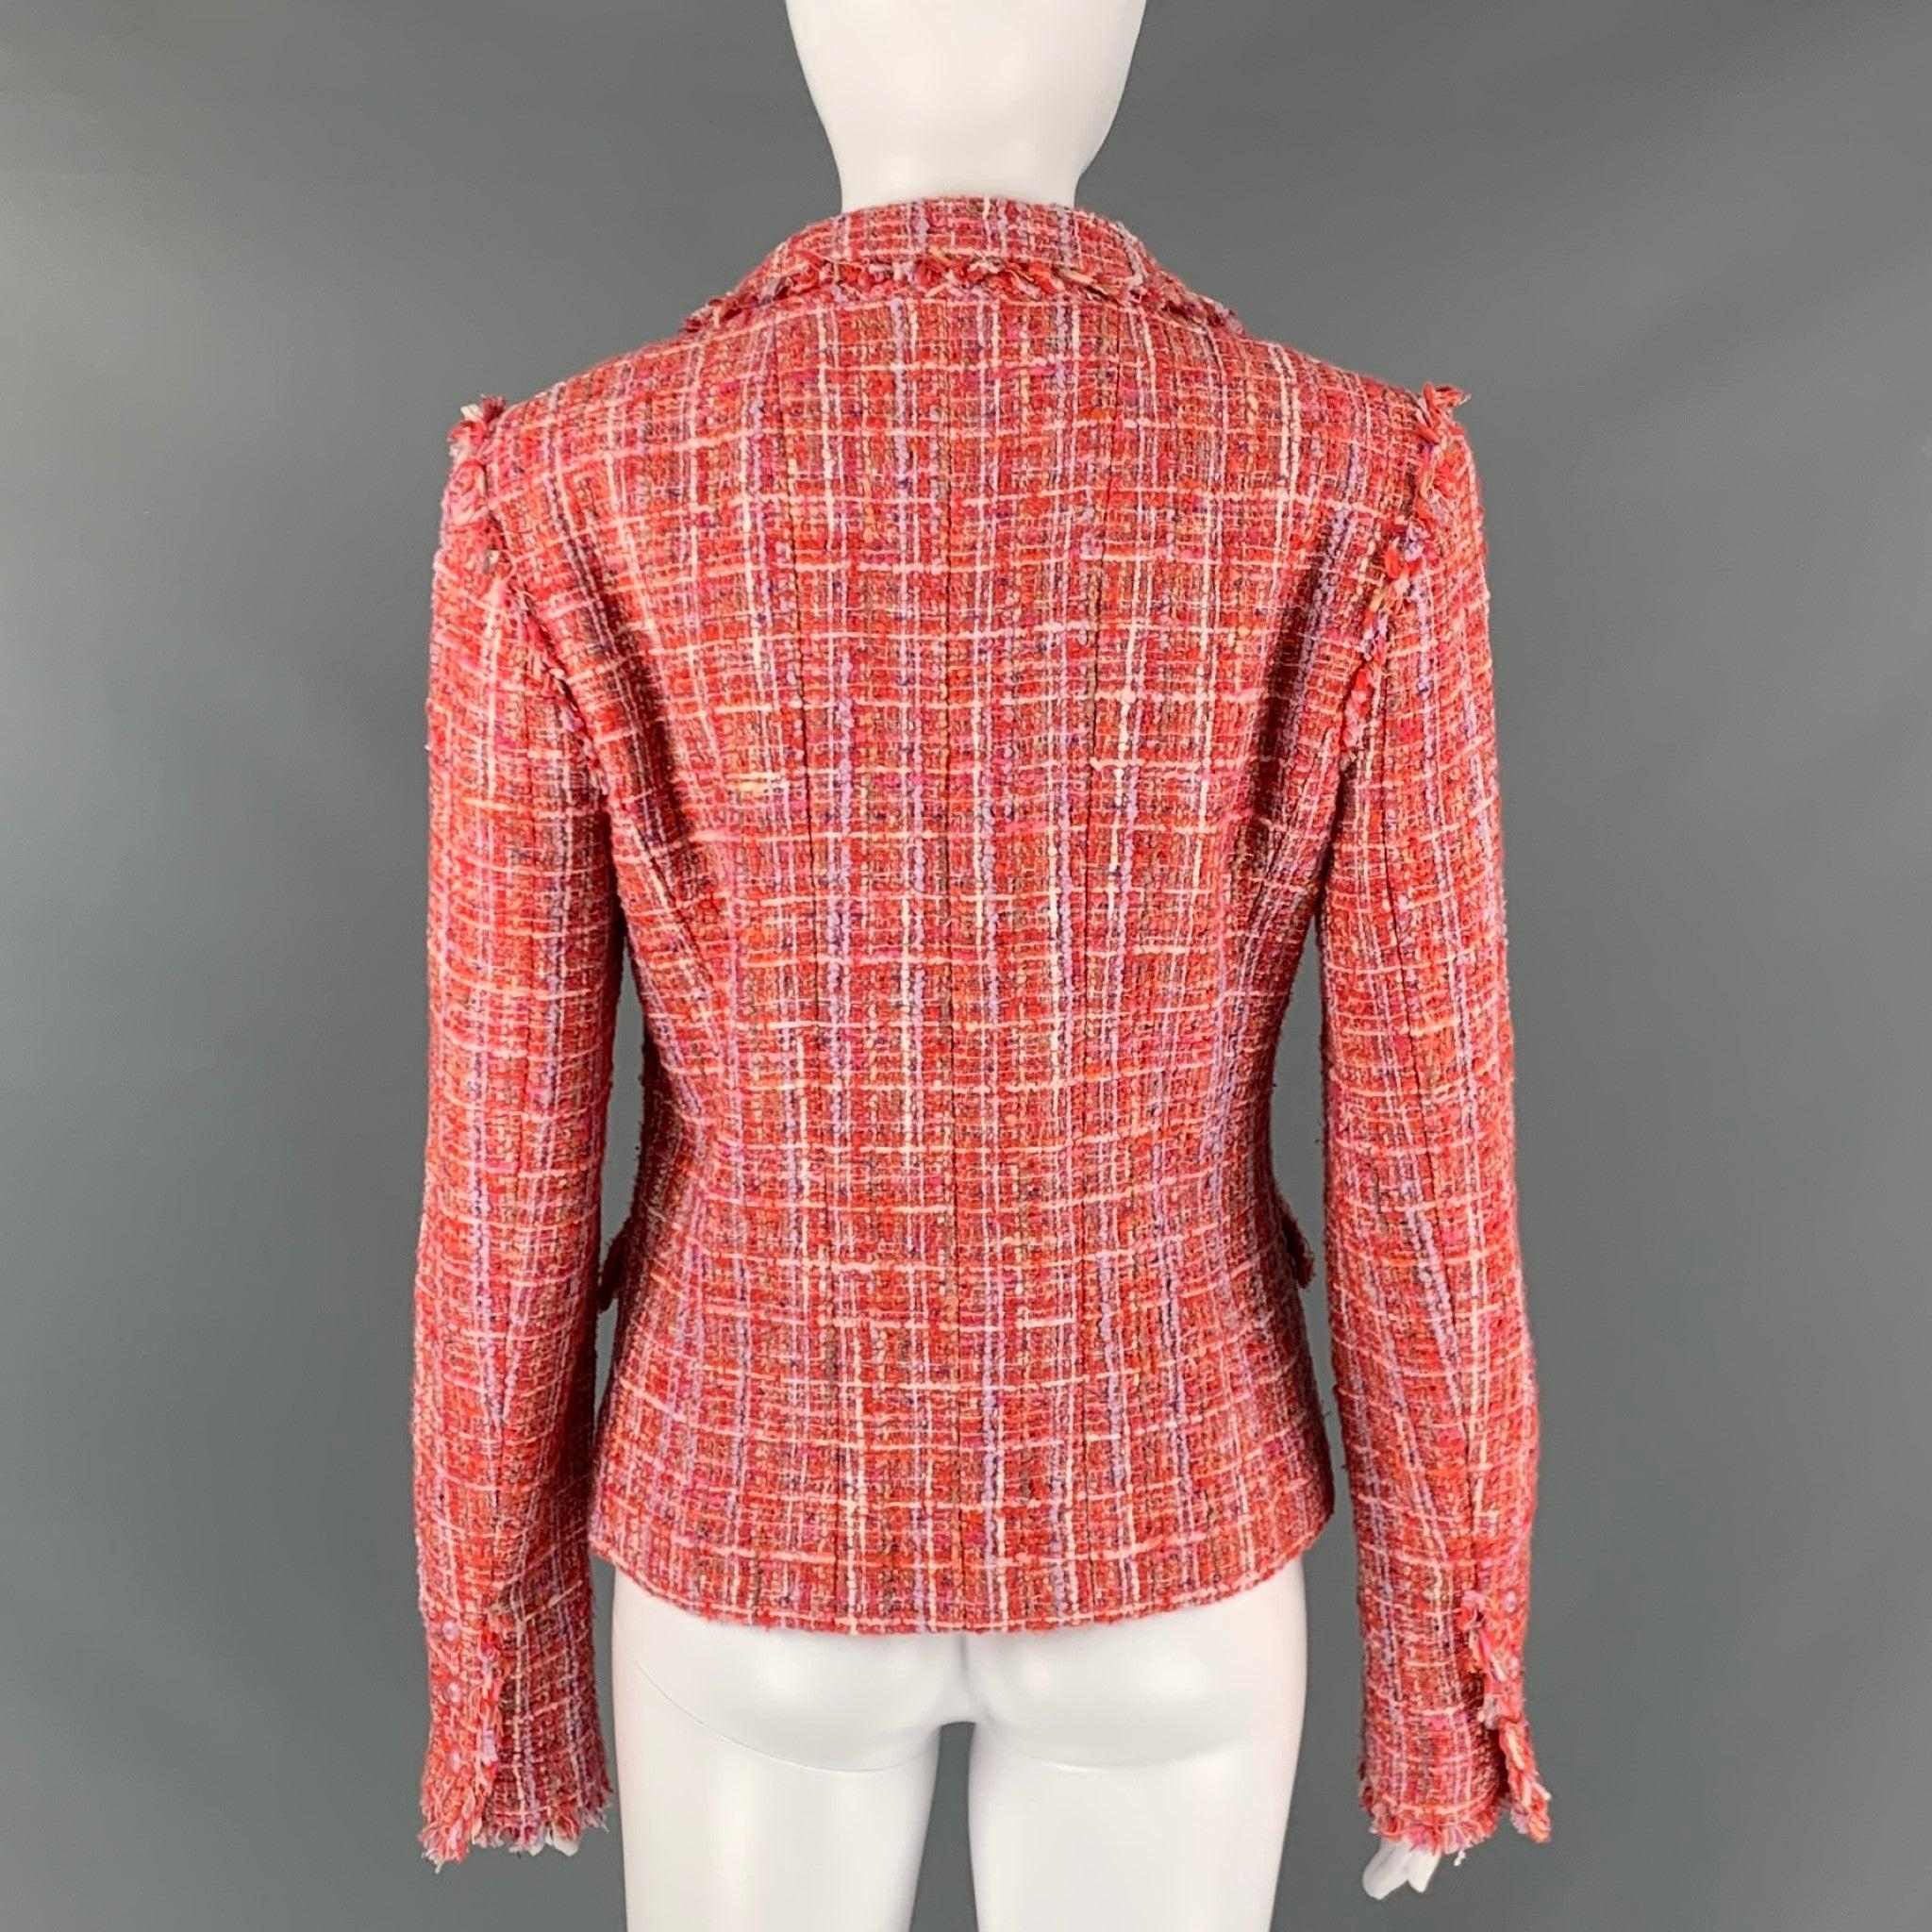 CHANEL P23159V13825 Size 4 Red White Cotton Blend Single breasted Jacket 1